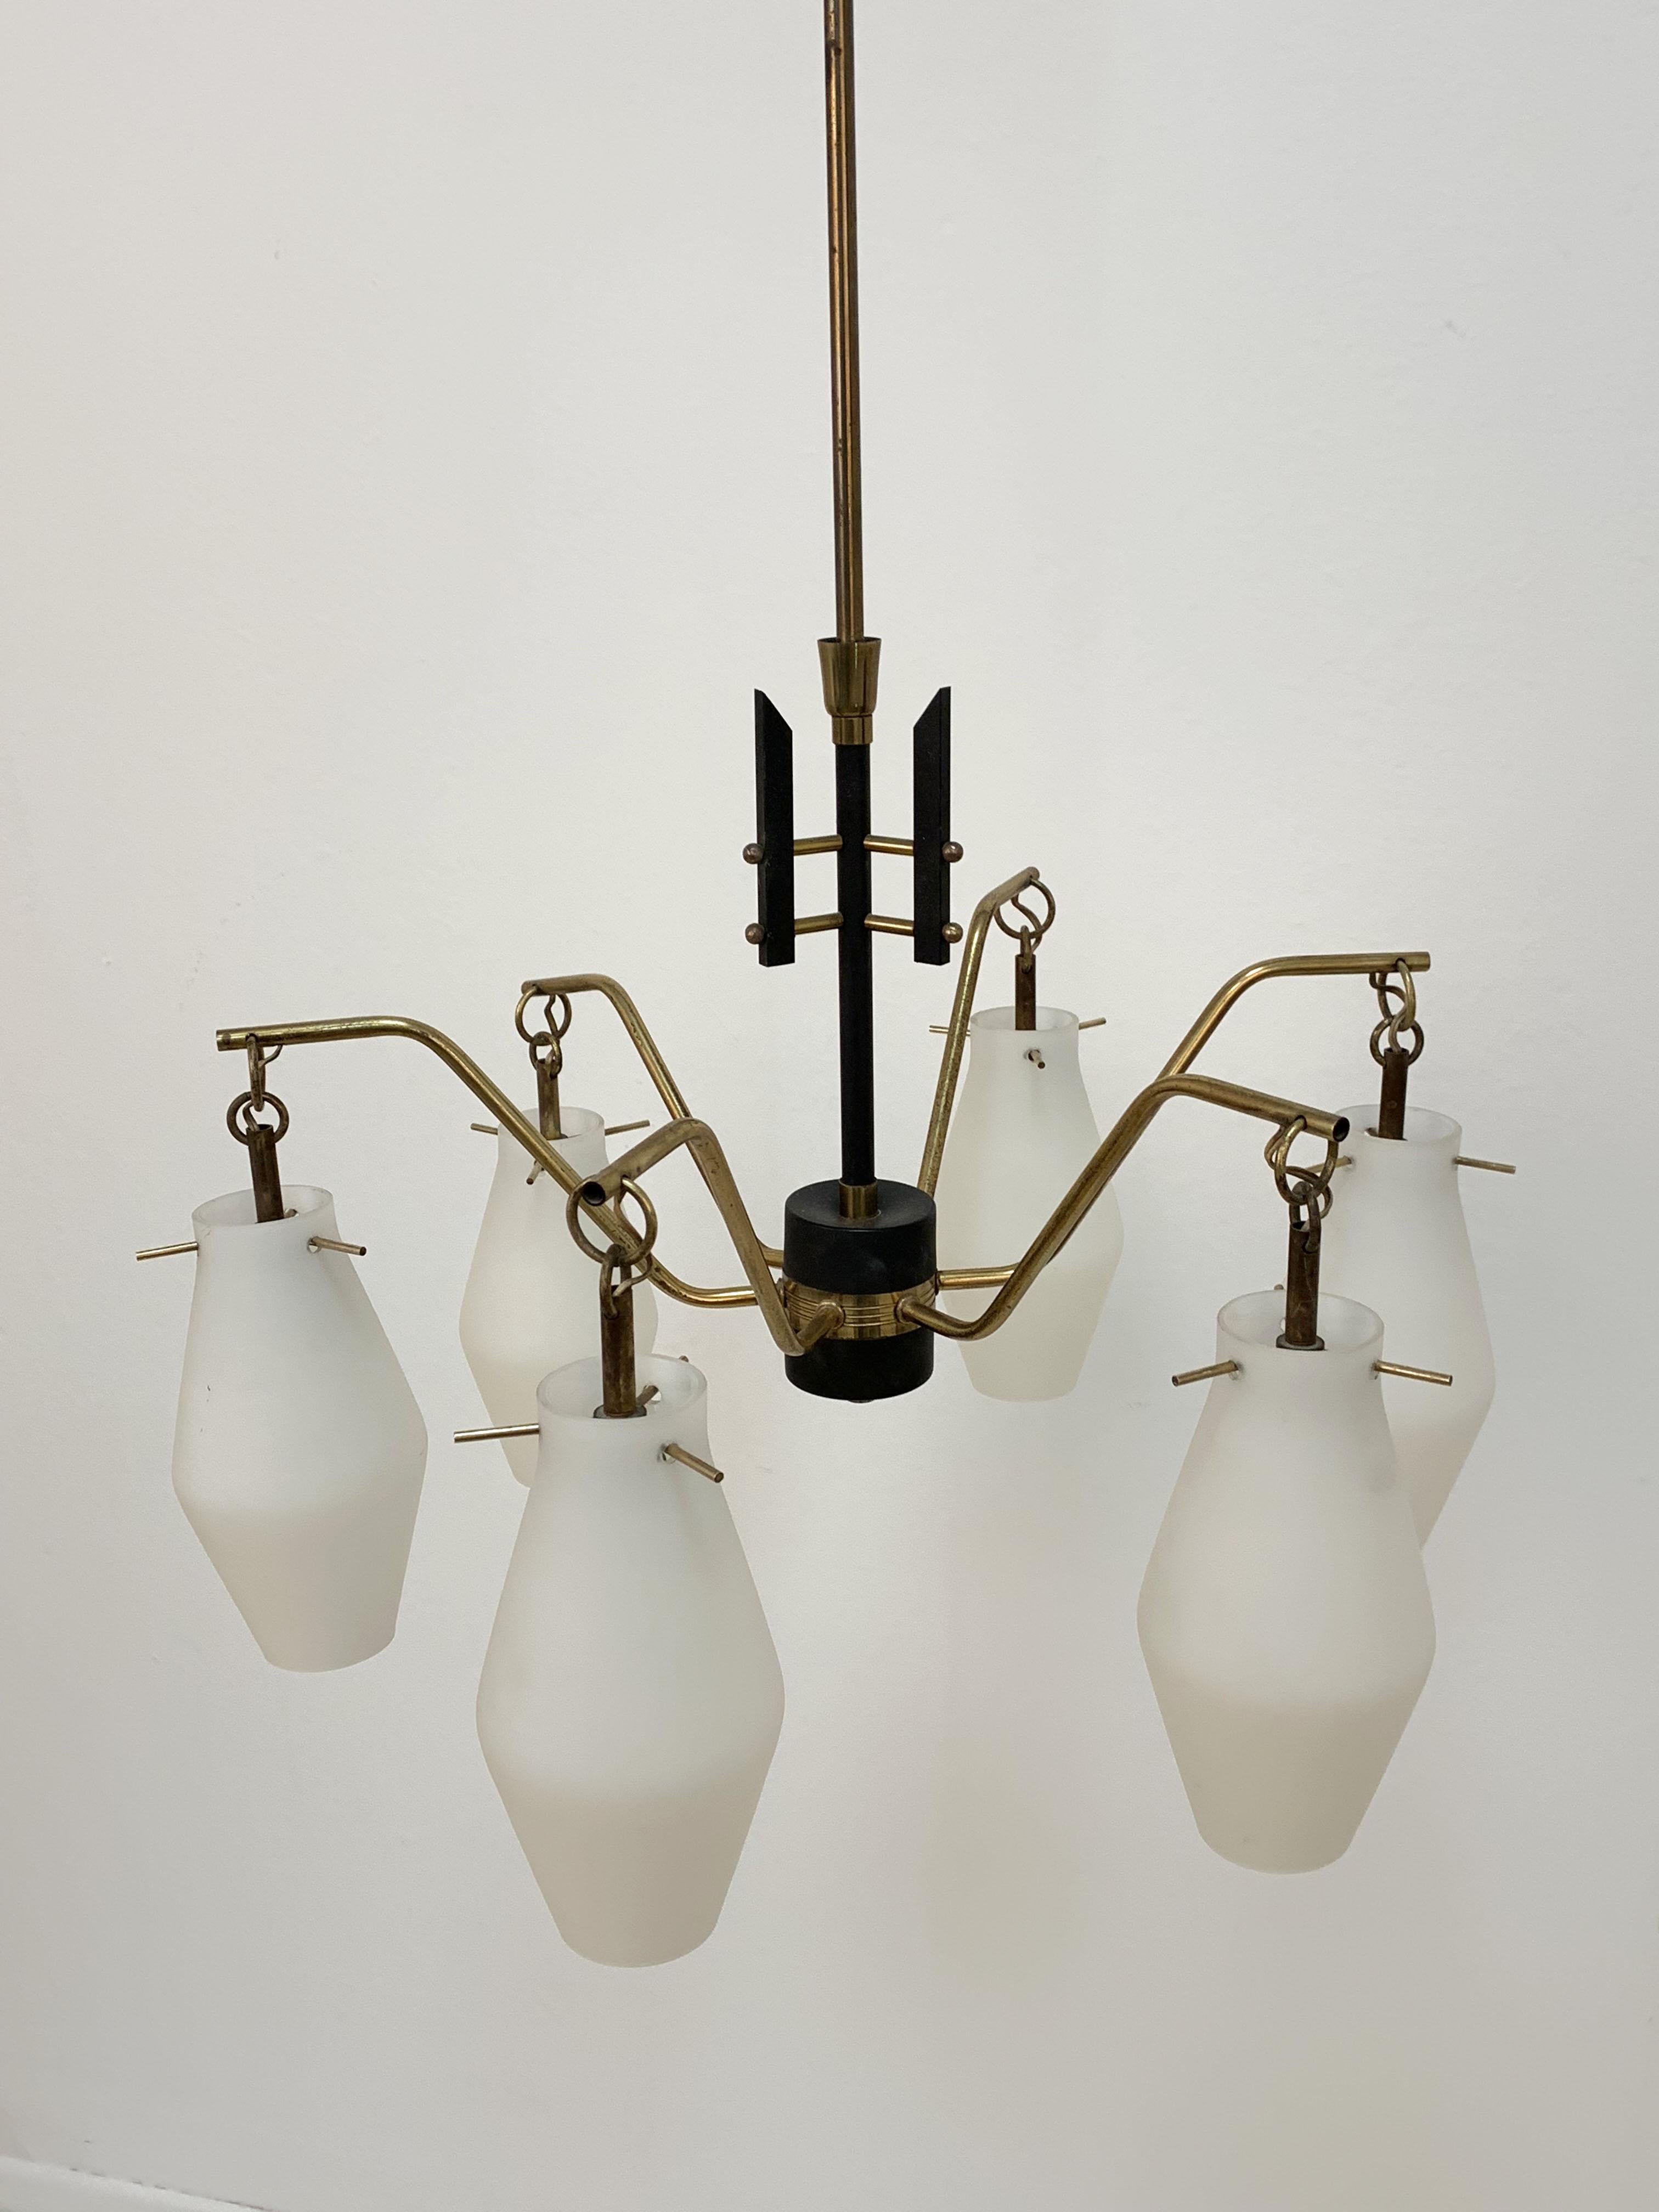 Lacquered Italian Chandelier, Opaline Glass, Brass, 6 Lighting Arms, attrib to Stilnovo For Sale